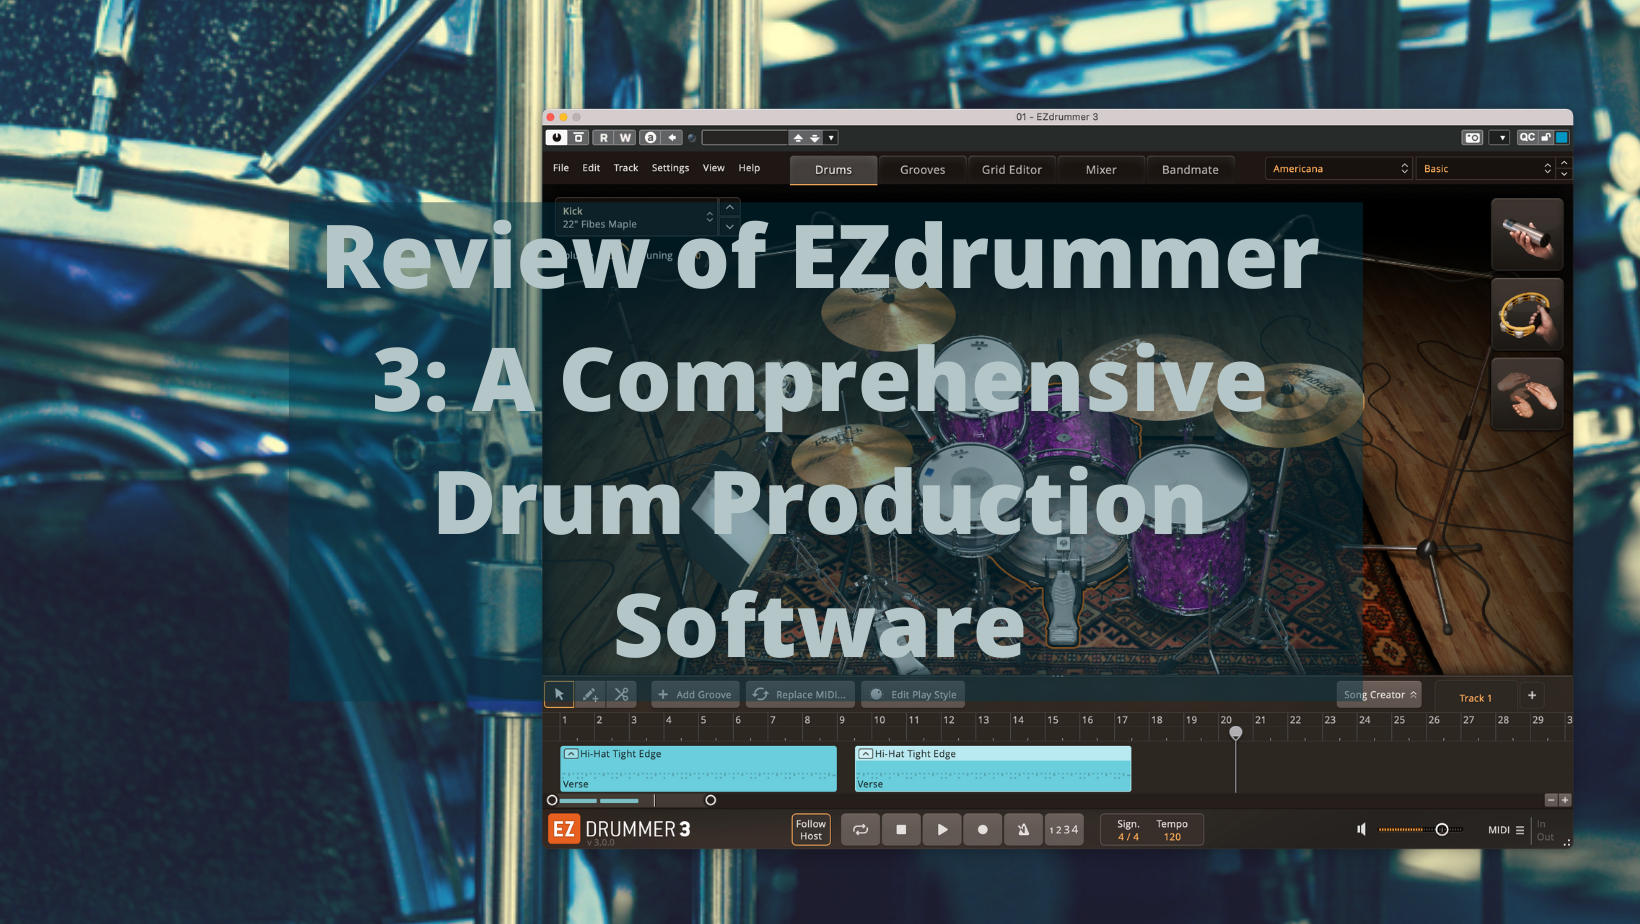 Review of EZdrummer 3: A Comprehensive Drum Production Software